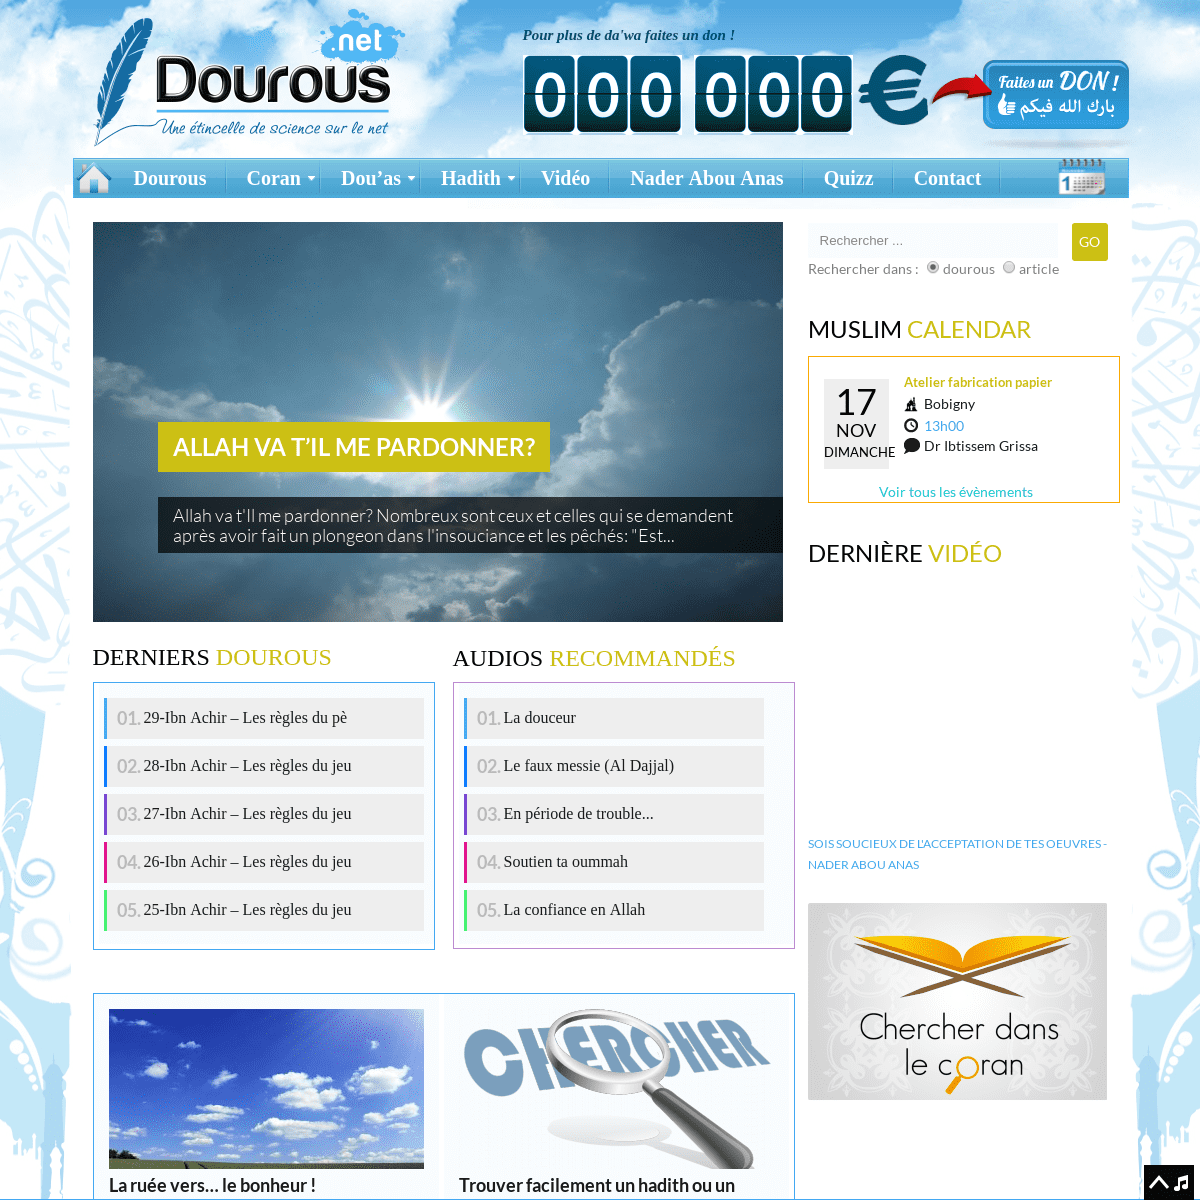 A complete backup of dourous.net